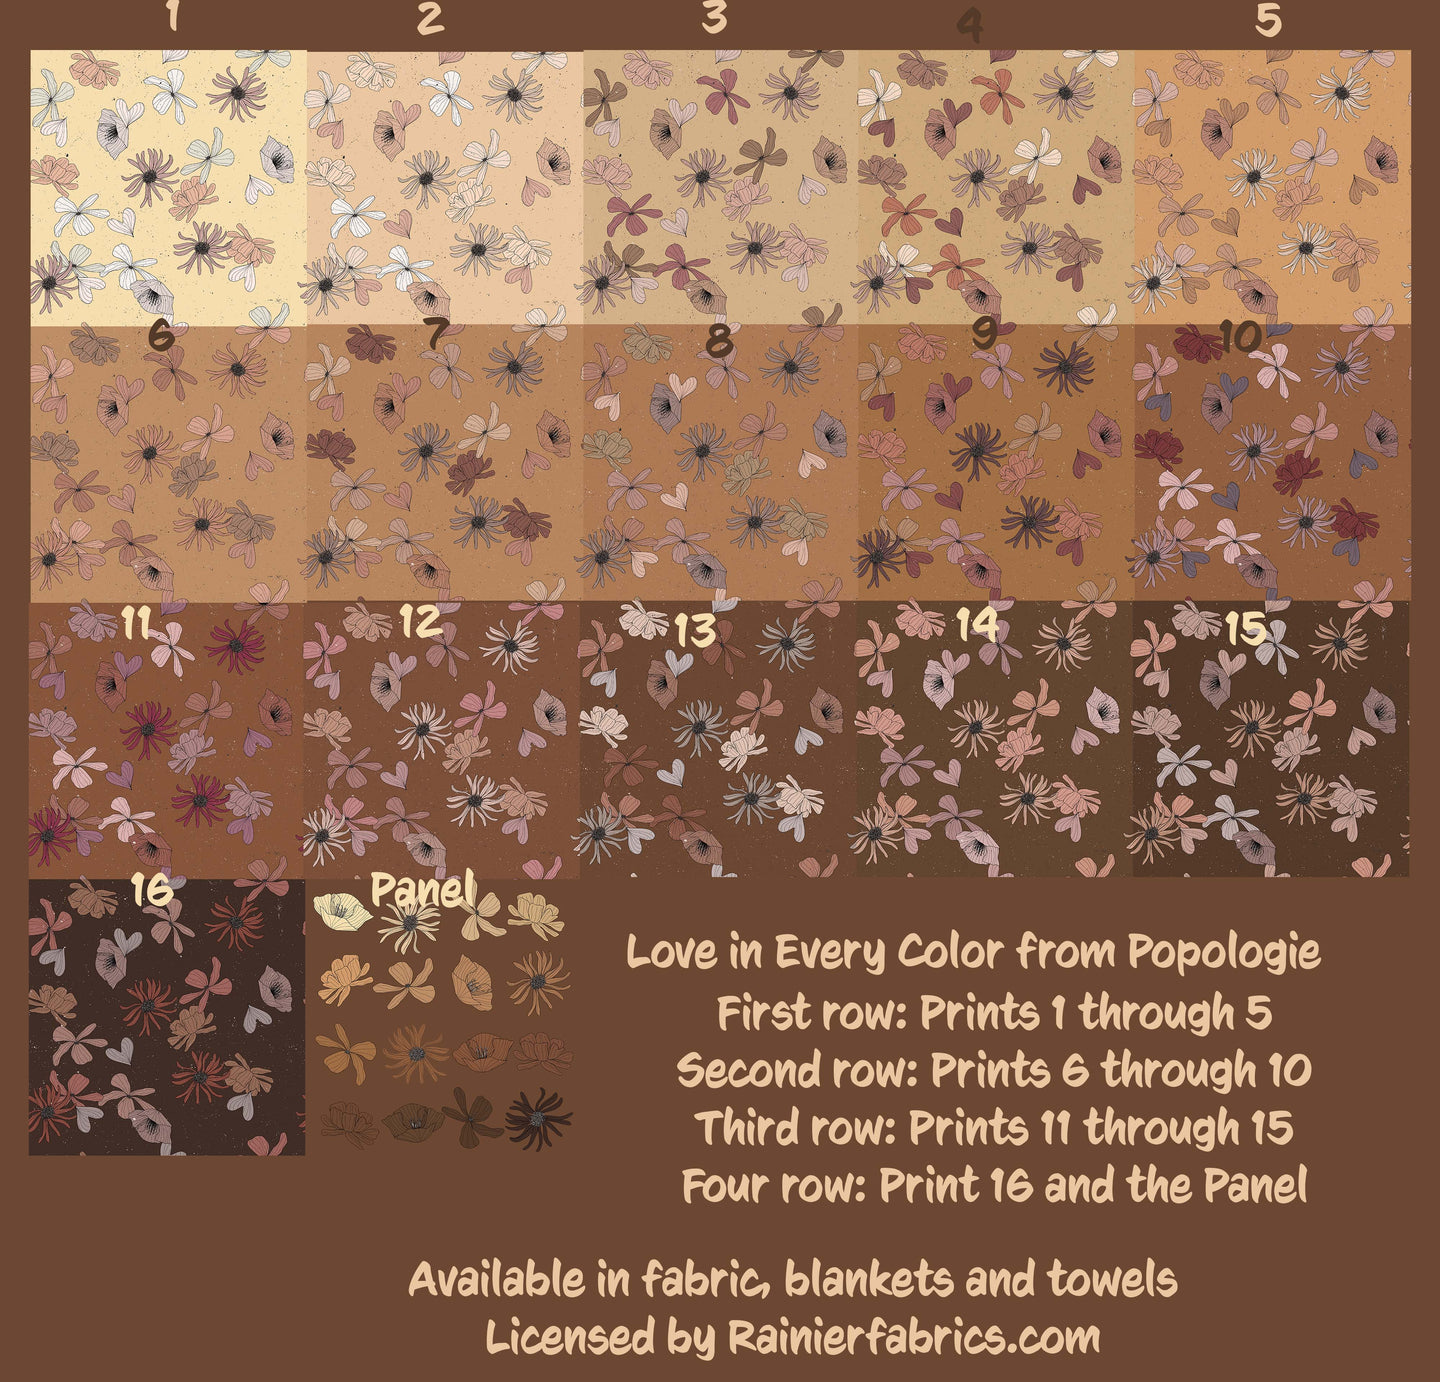 Love in Every Color - art from Popologie - 2-5 day turnaround - Order by 1/2 yard; Description of bases below